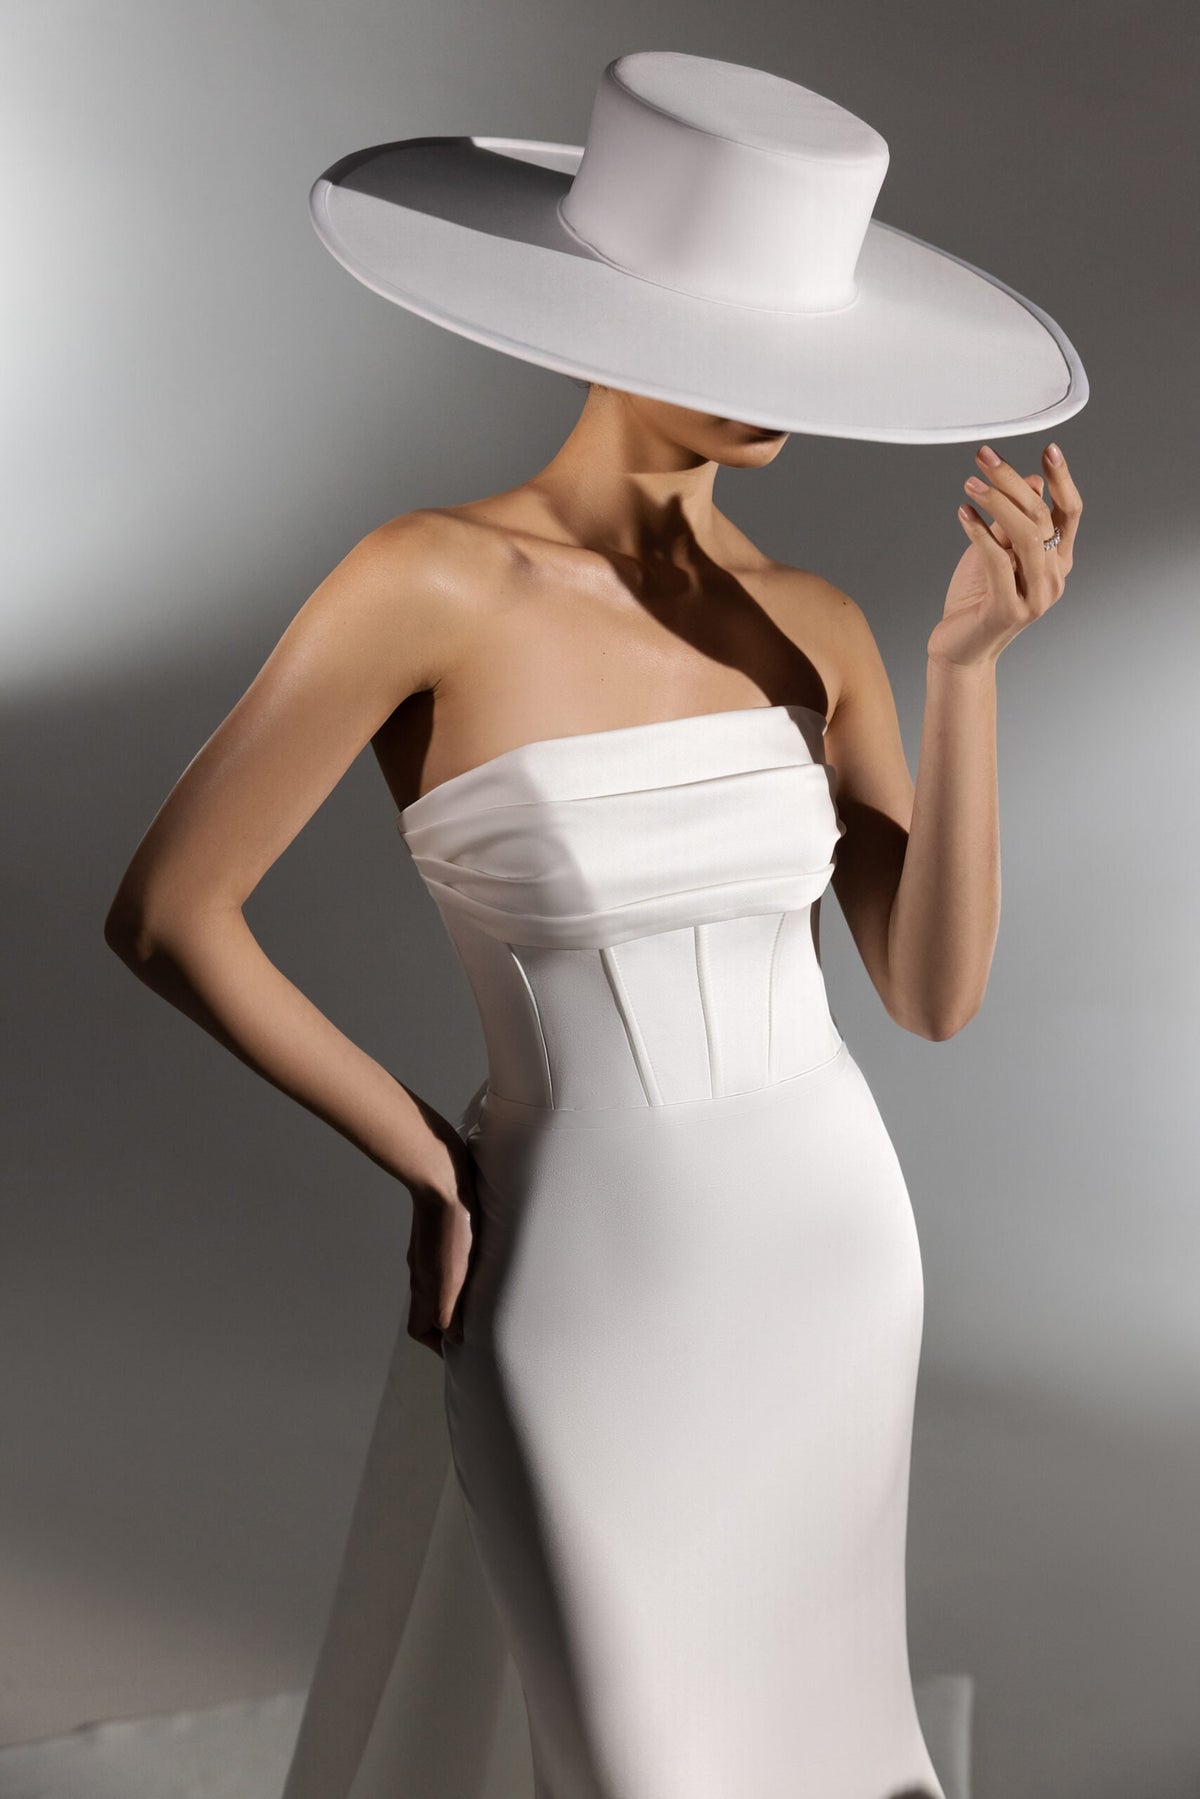 Simple Fit and Flare Minimalist Sleeveless Strapless Straight Neckline Open Back Bare Shoulders Watteau Style Train Elegant Design